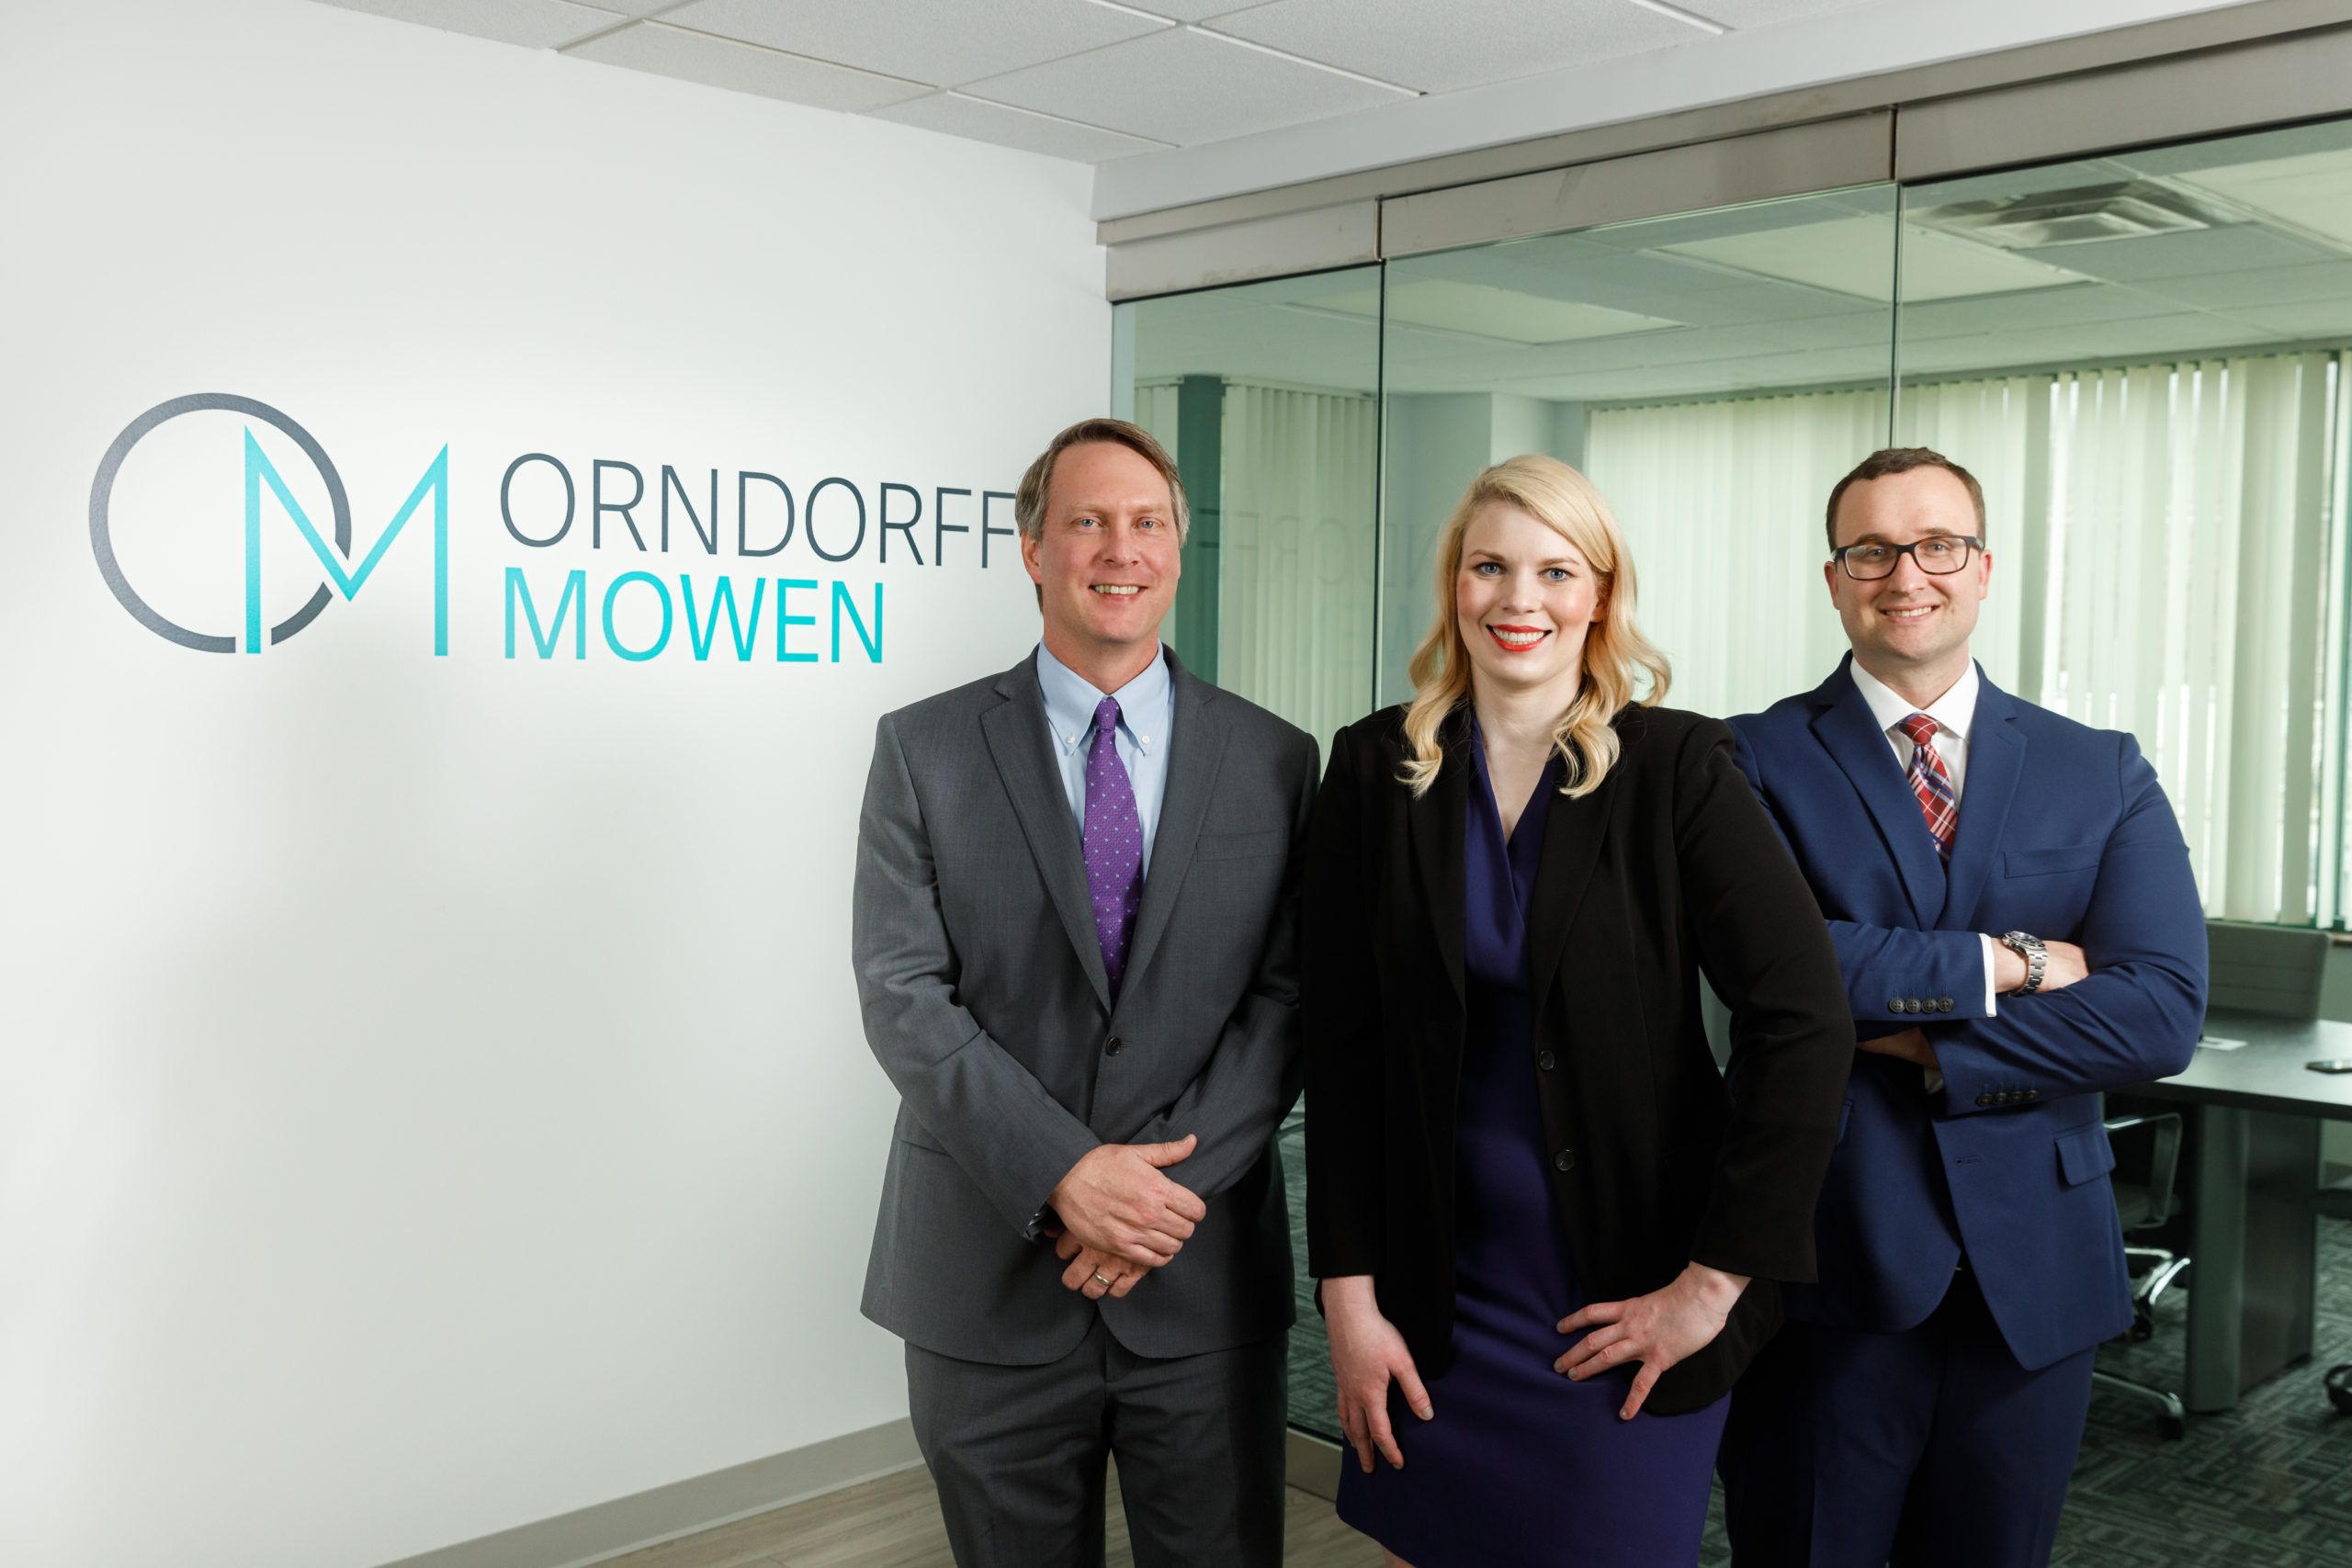 The managing partners of Orndorff Mowen in the office in front of their logo on the wall